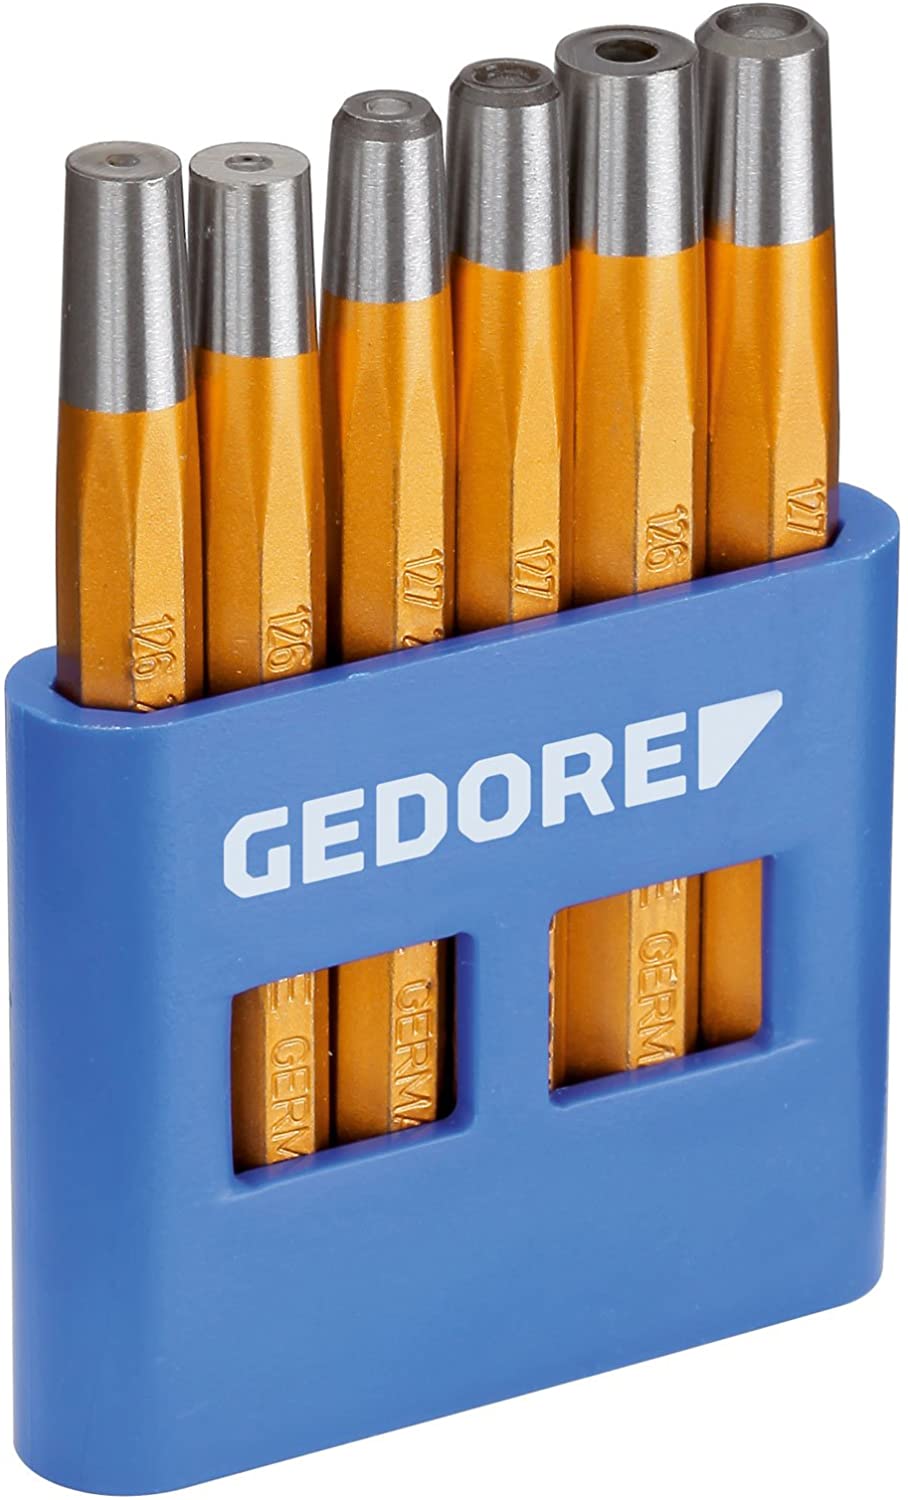 Gedore 125 B Set of rivetting setters and snap dies 6 pieces